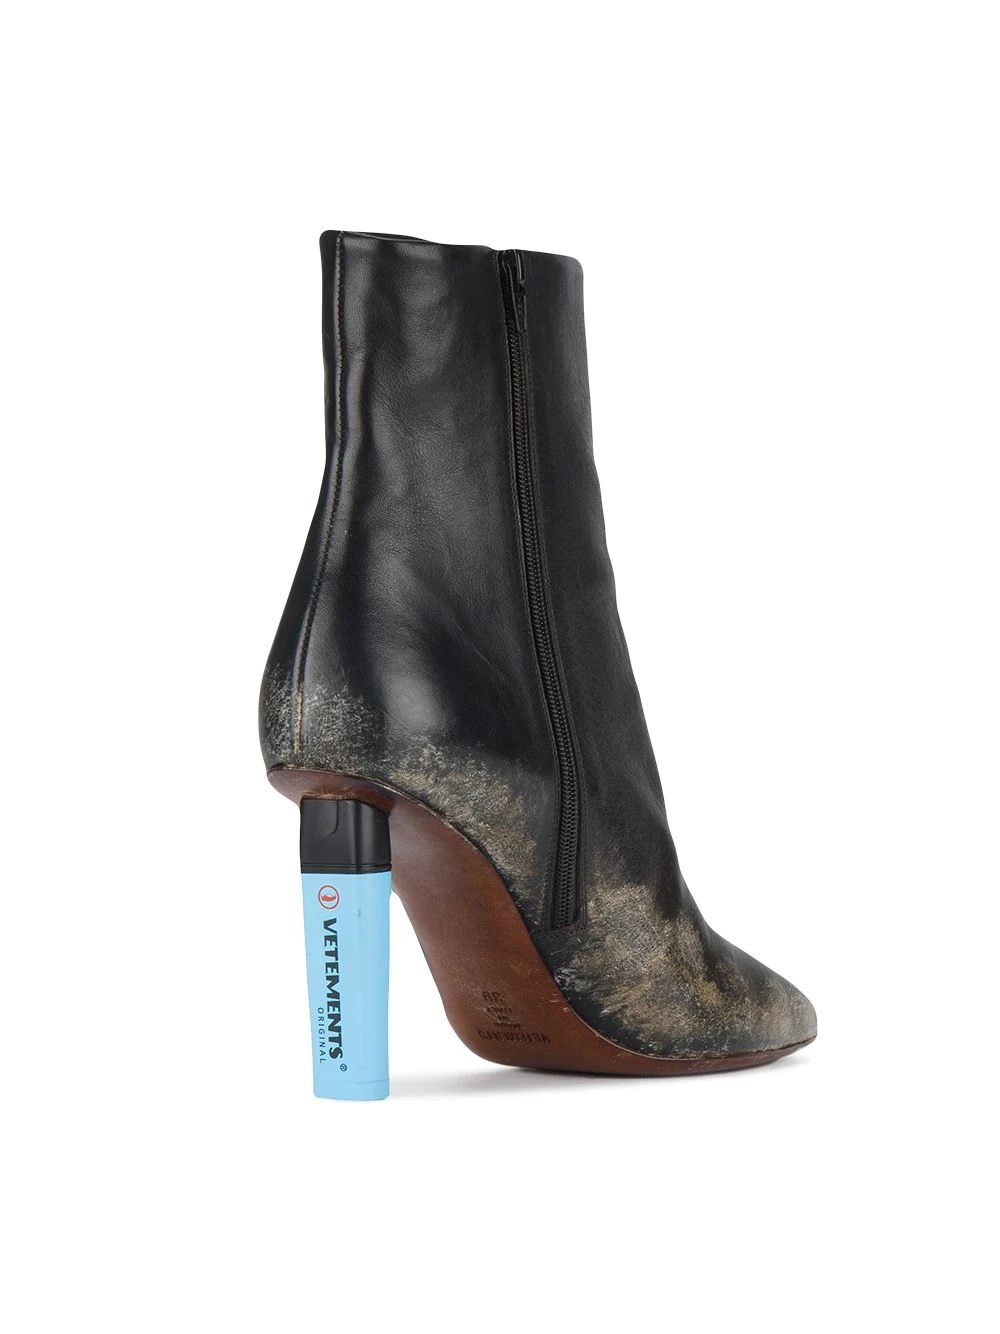 Gypsy Ankle Boot with Blue Highlighter Heel - 4